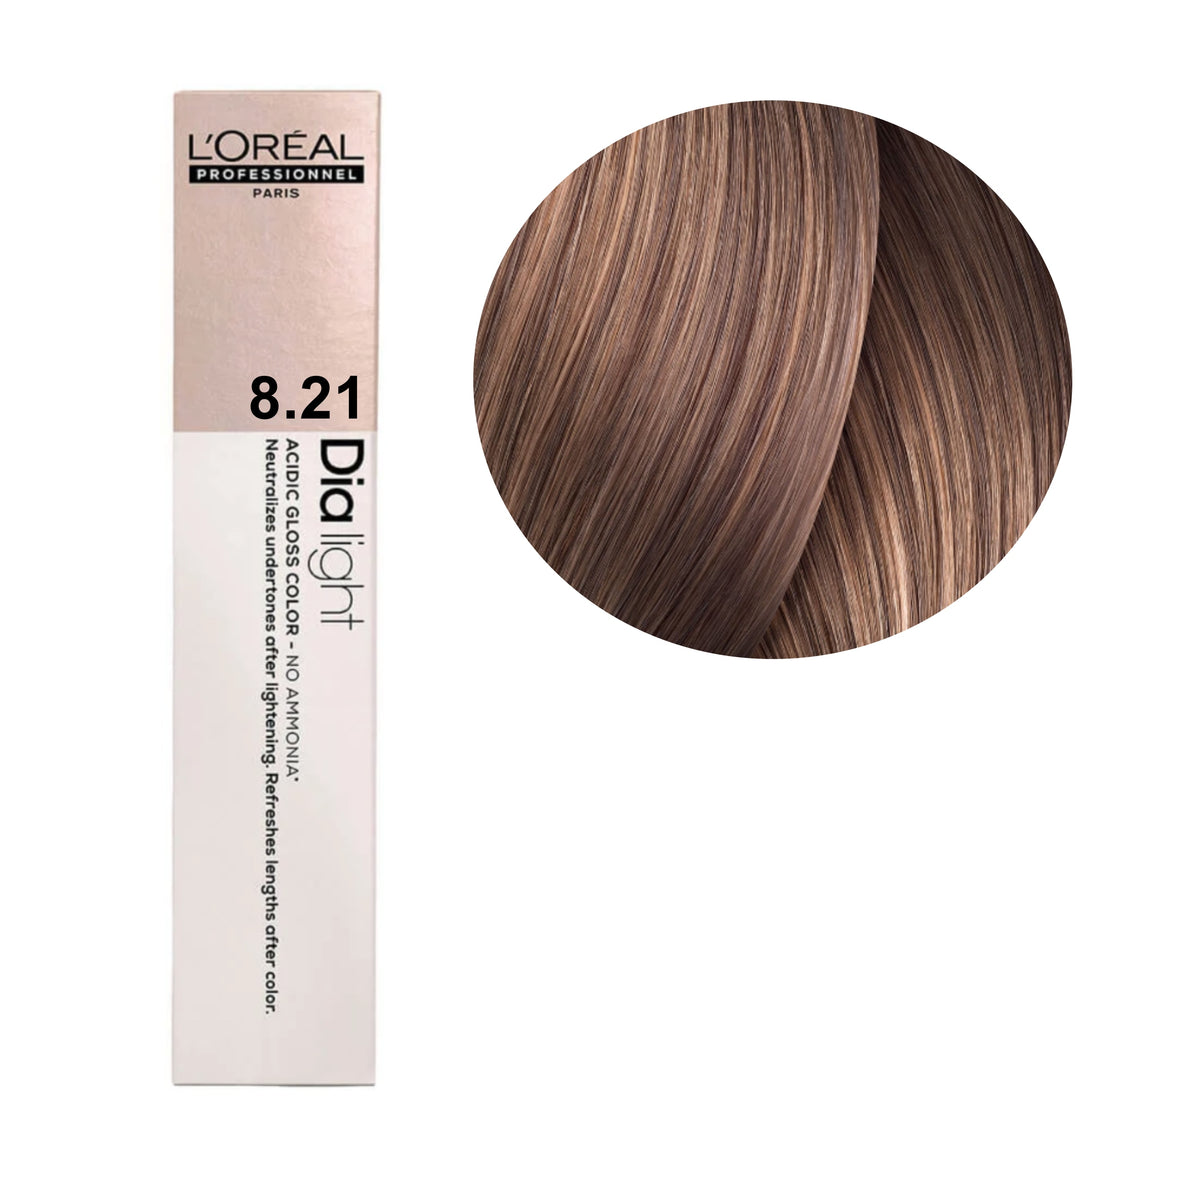 a box of lorel hair color in light brown